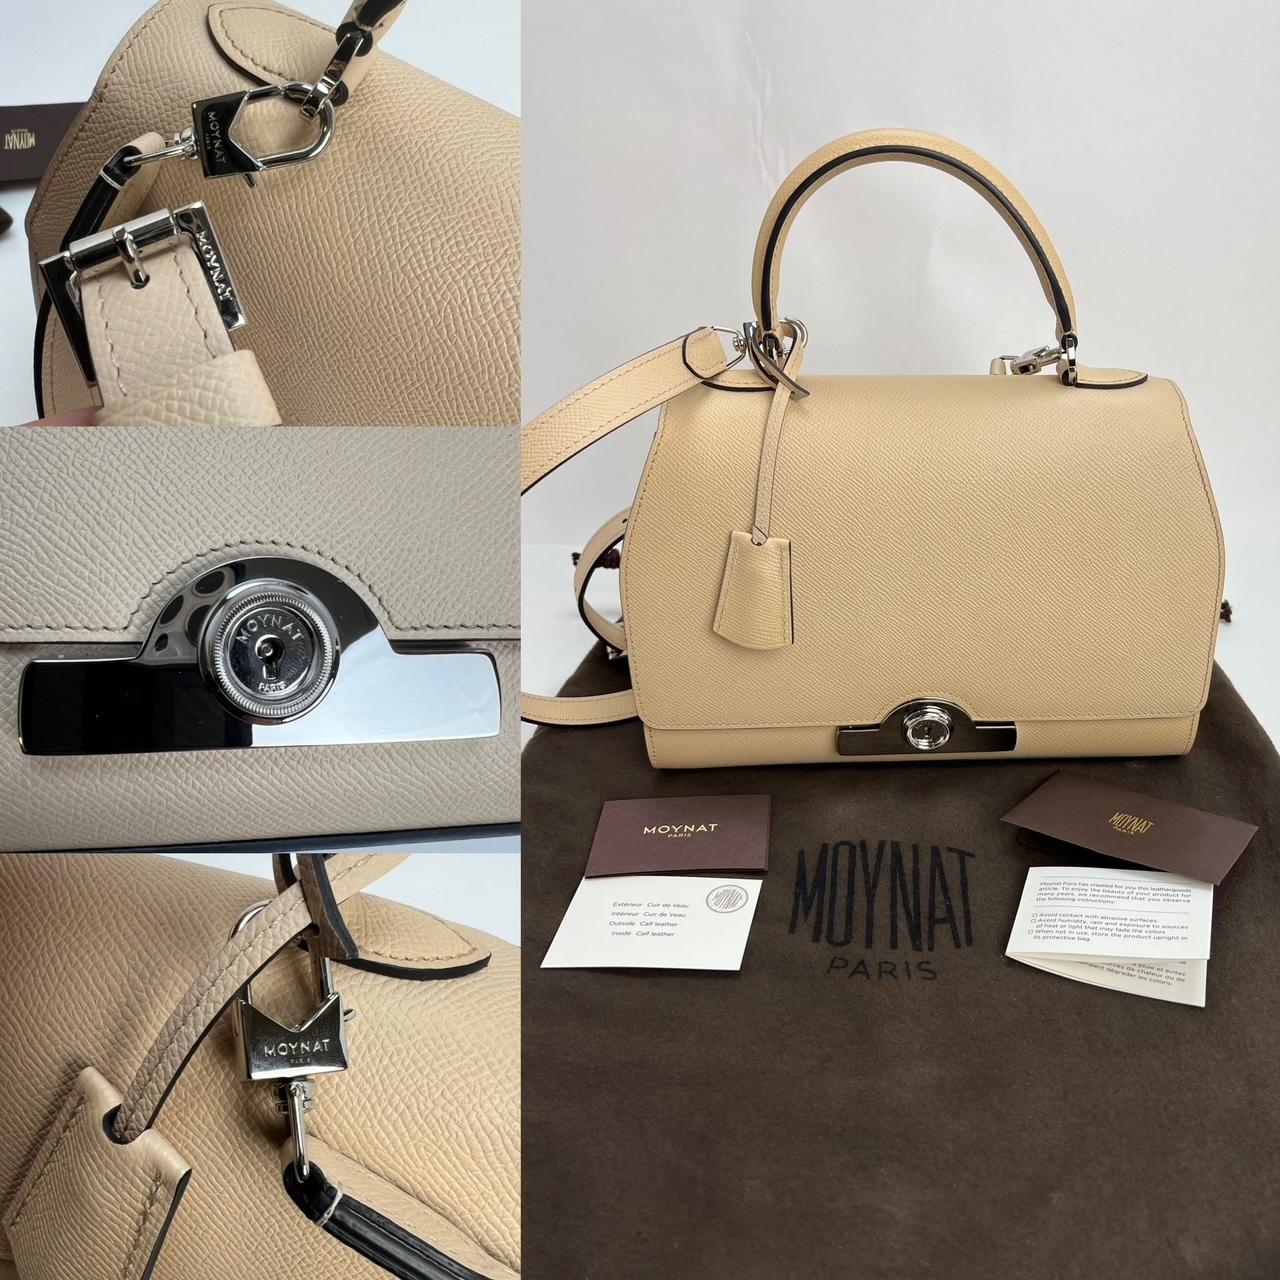 Pre-Owned  100% Authentic
Moynat Carat Calfskin Rejane PM Hand Bag
RATING: A...excellent, near mint, has little to no signs of wear
MATERIAL: leather
STRAP: Moynat Strap removable adjustable 36'' to 44'' long
DROP:
HANDLE:  single leather, few faint